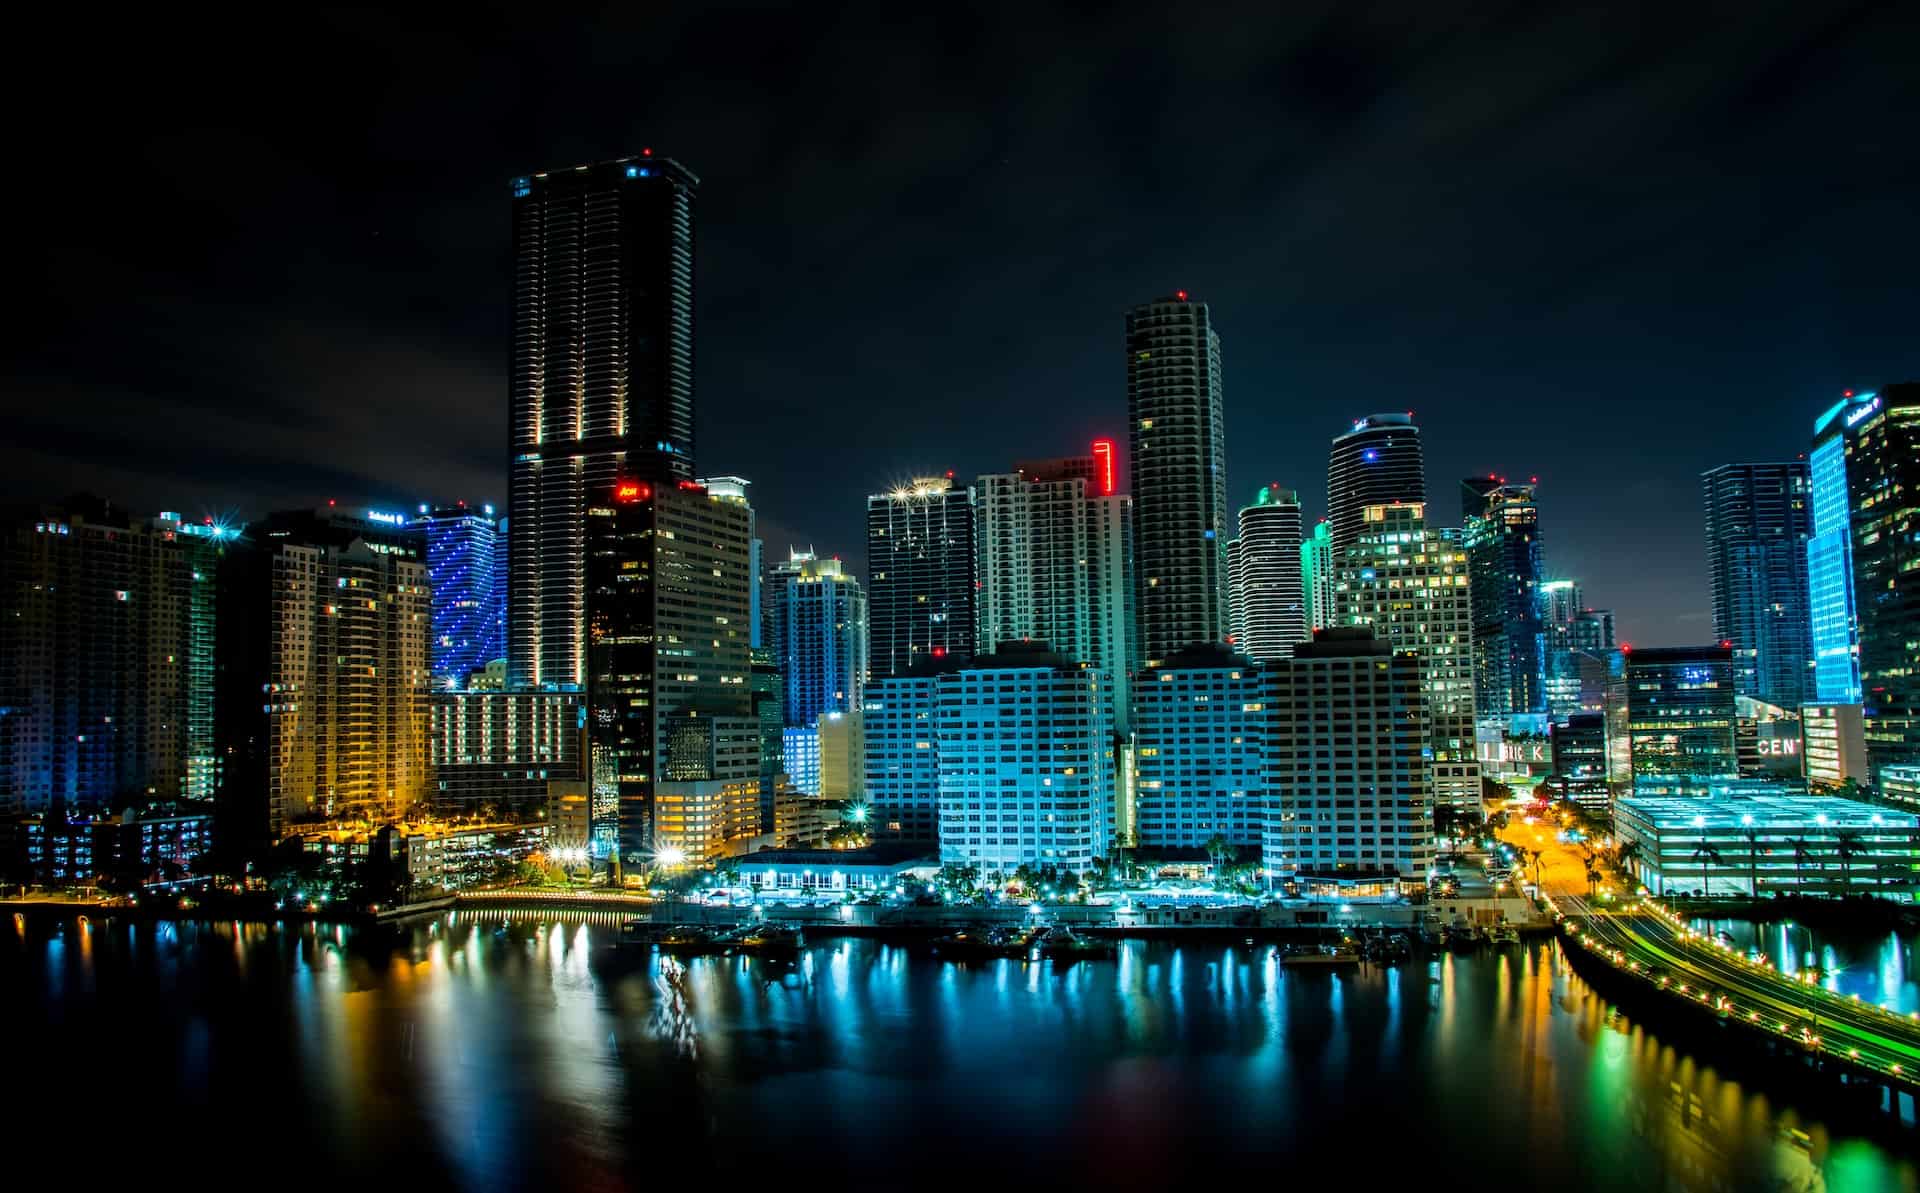 Miami's Nightlife: Live It Up at the Top Bars, Clubs & More